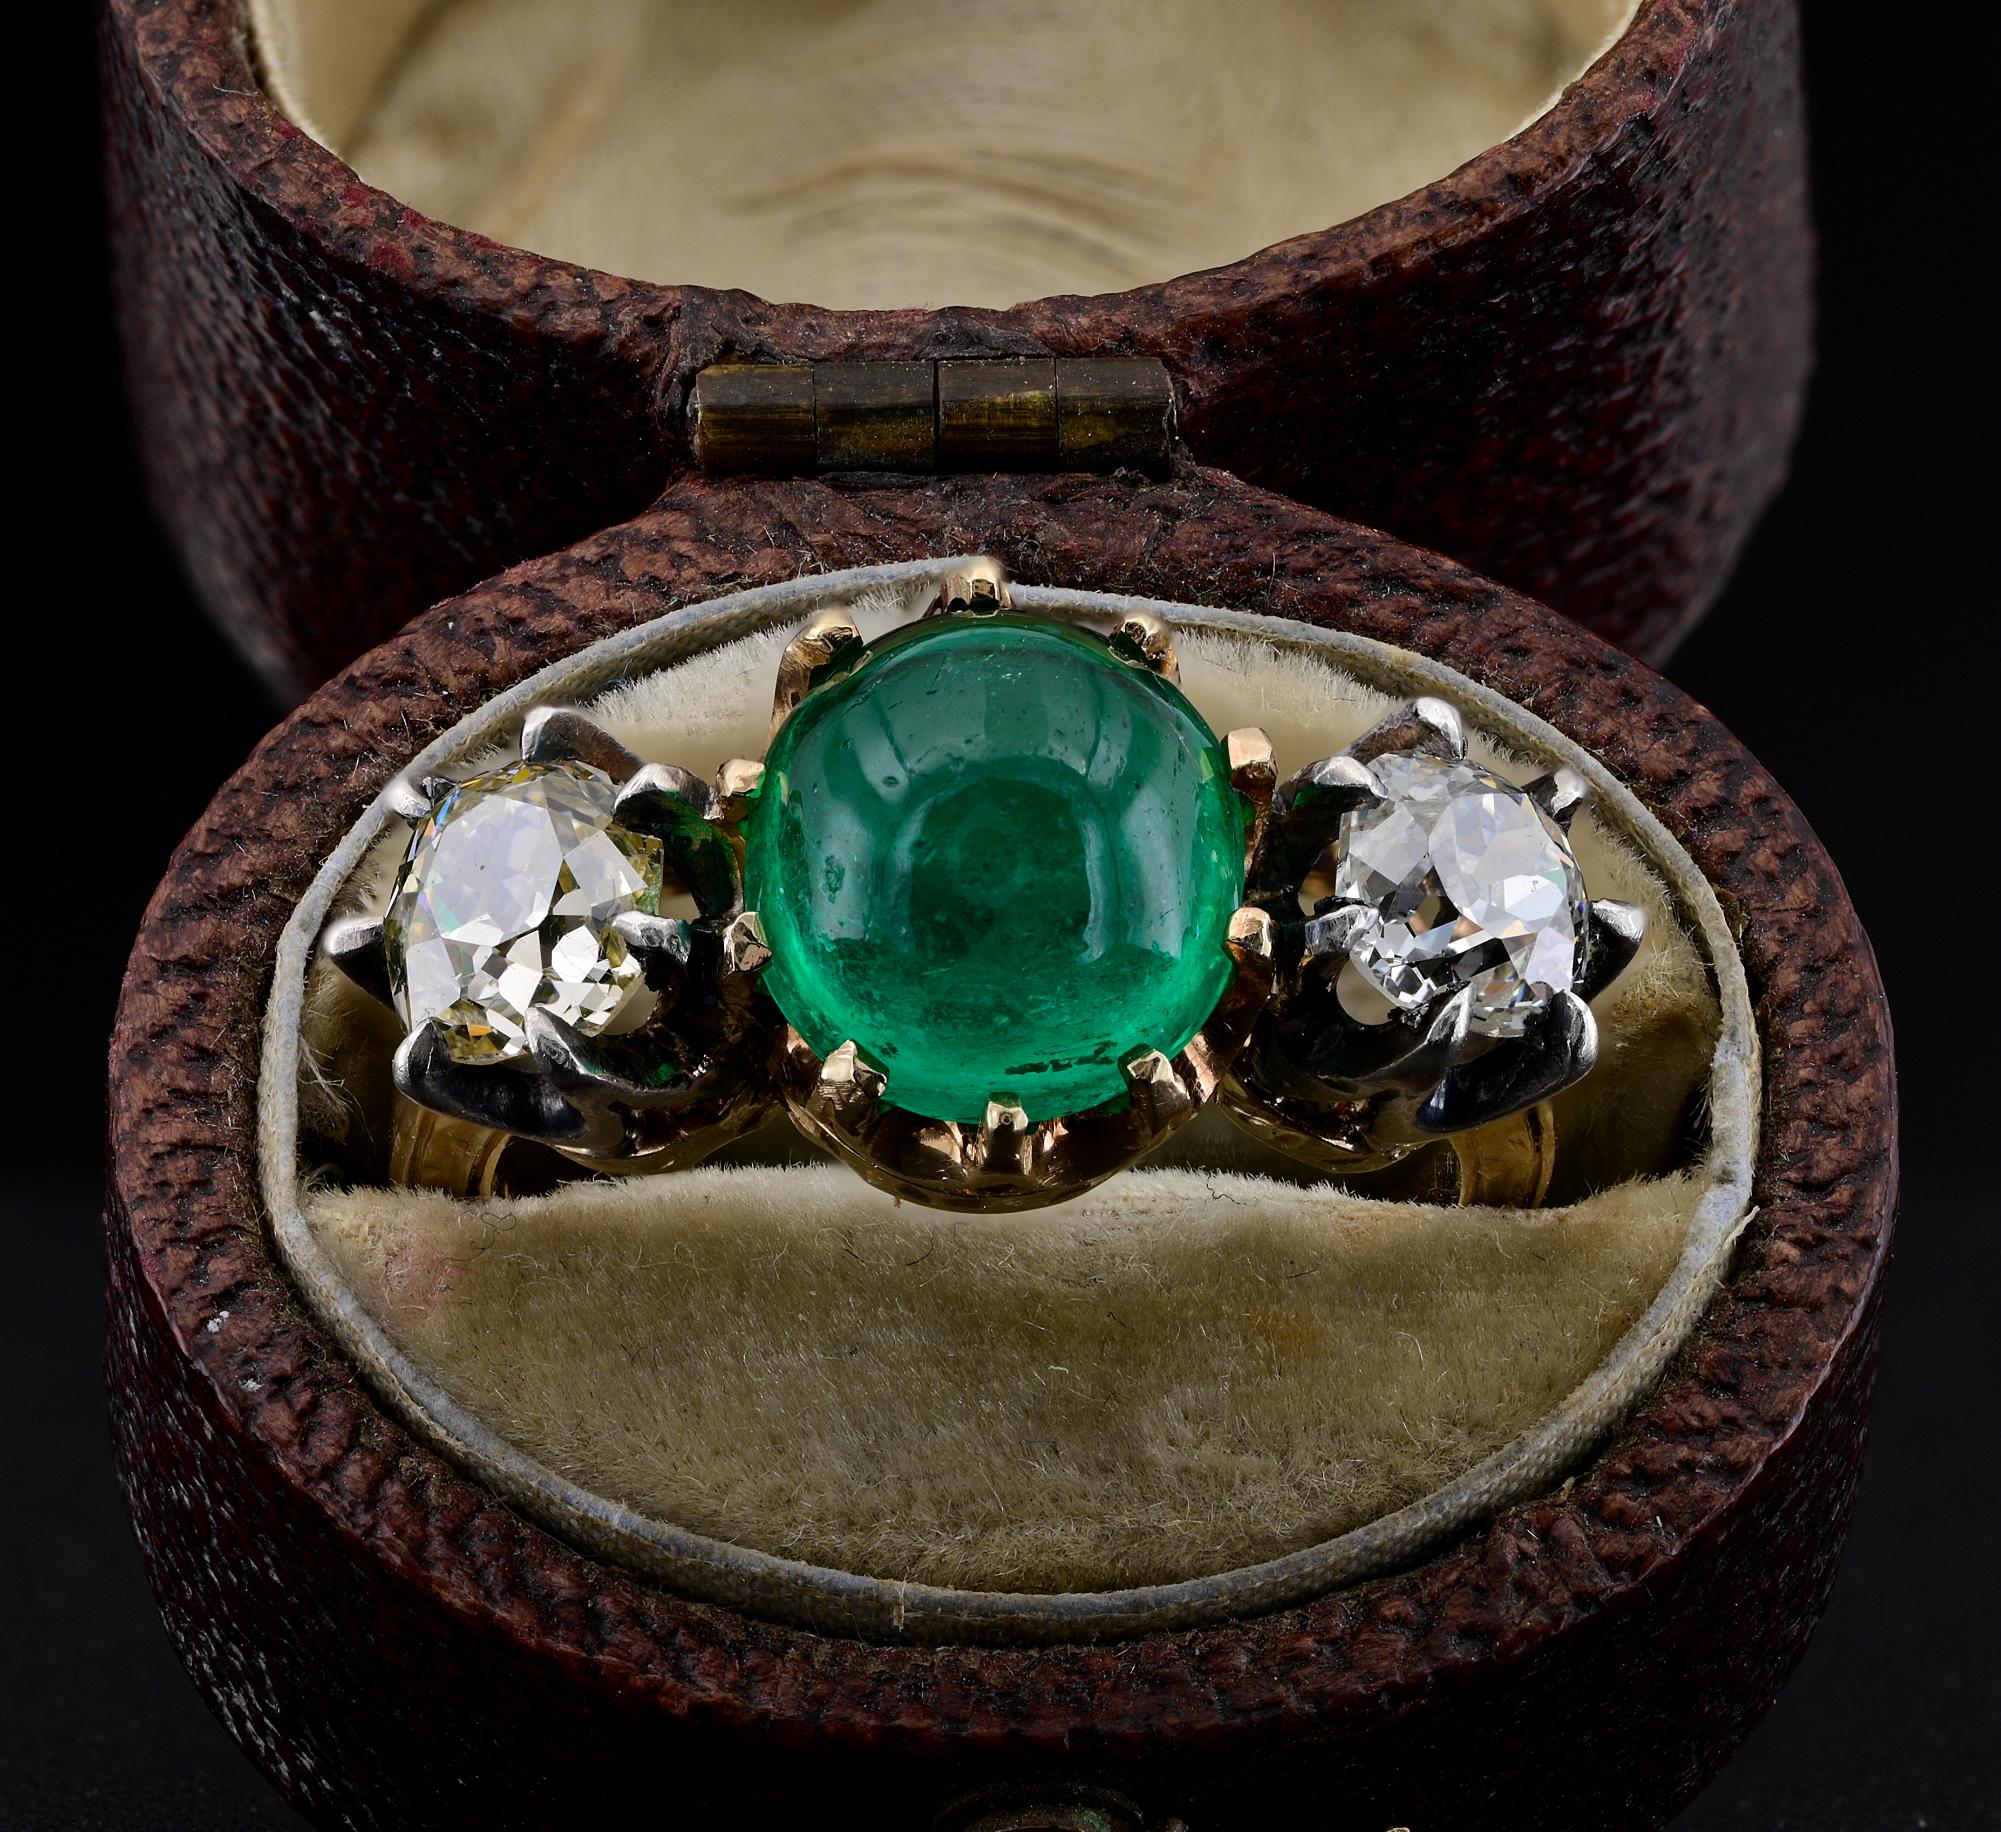 This outstanding Victorian ring is 1890 ca
Skillfully hand crafted of solid 18 Kt gold with little silver portions for the Diamonds claws
The ring is of simply trilogy facing up with a trio of Diamond and Emerald and pretty carving details running